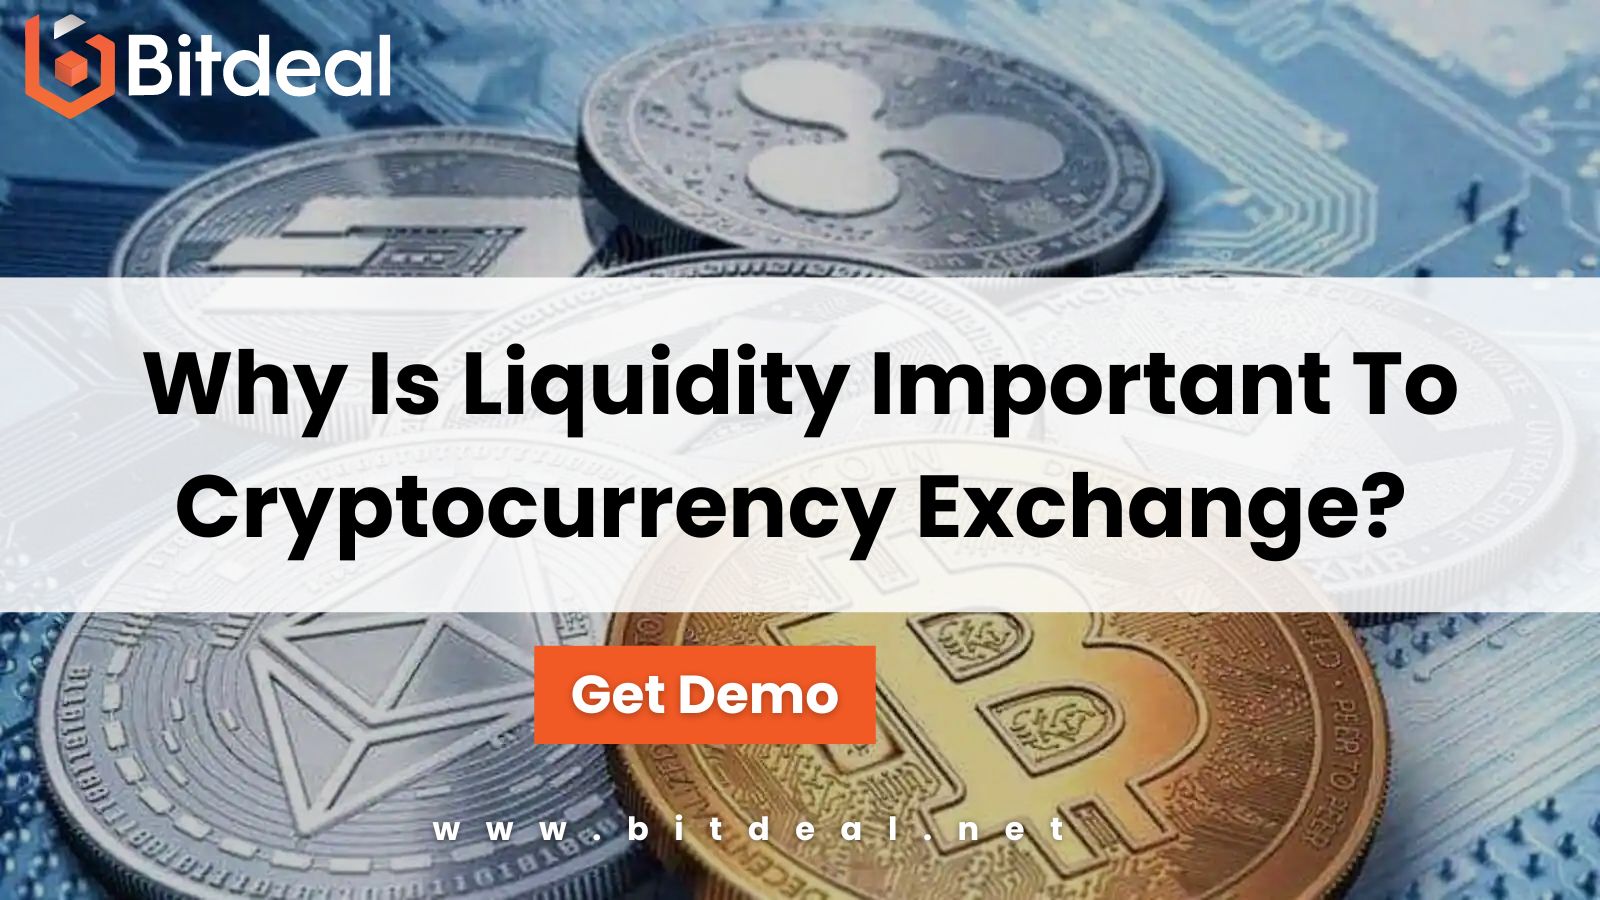 Why Is Liquidity Important To Cryptocurrency Exchange?